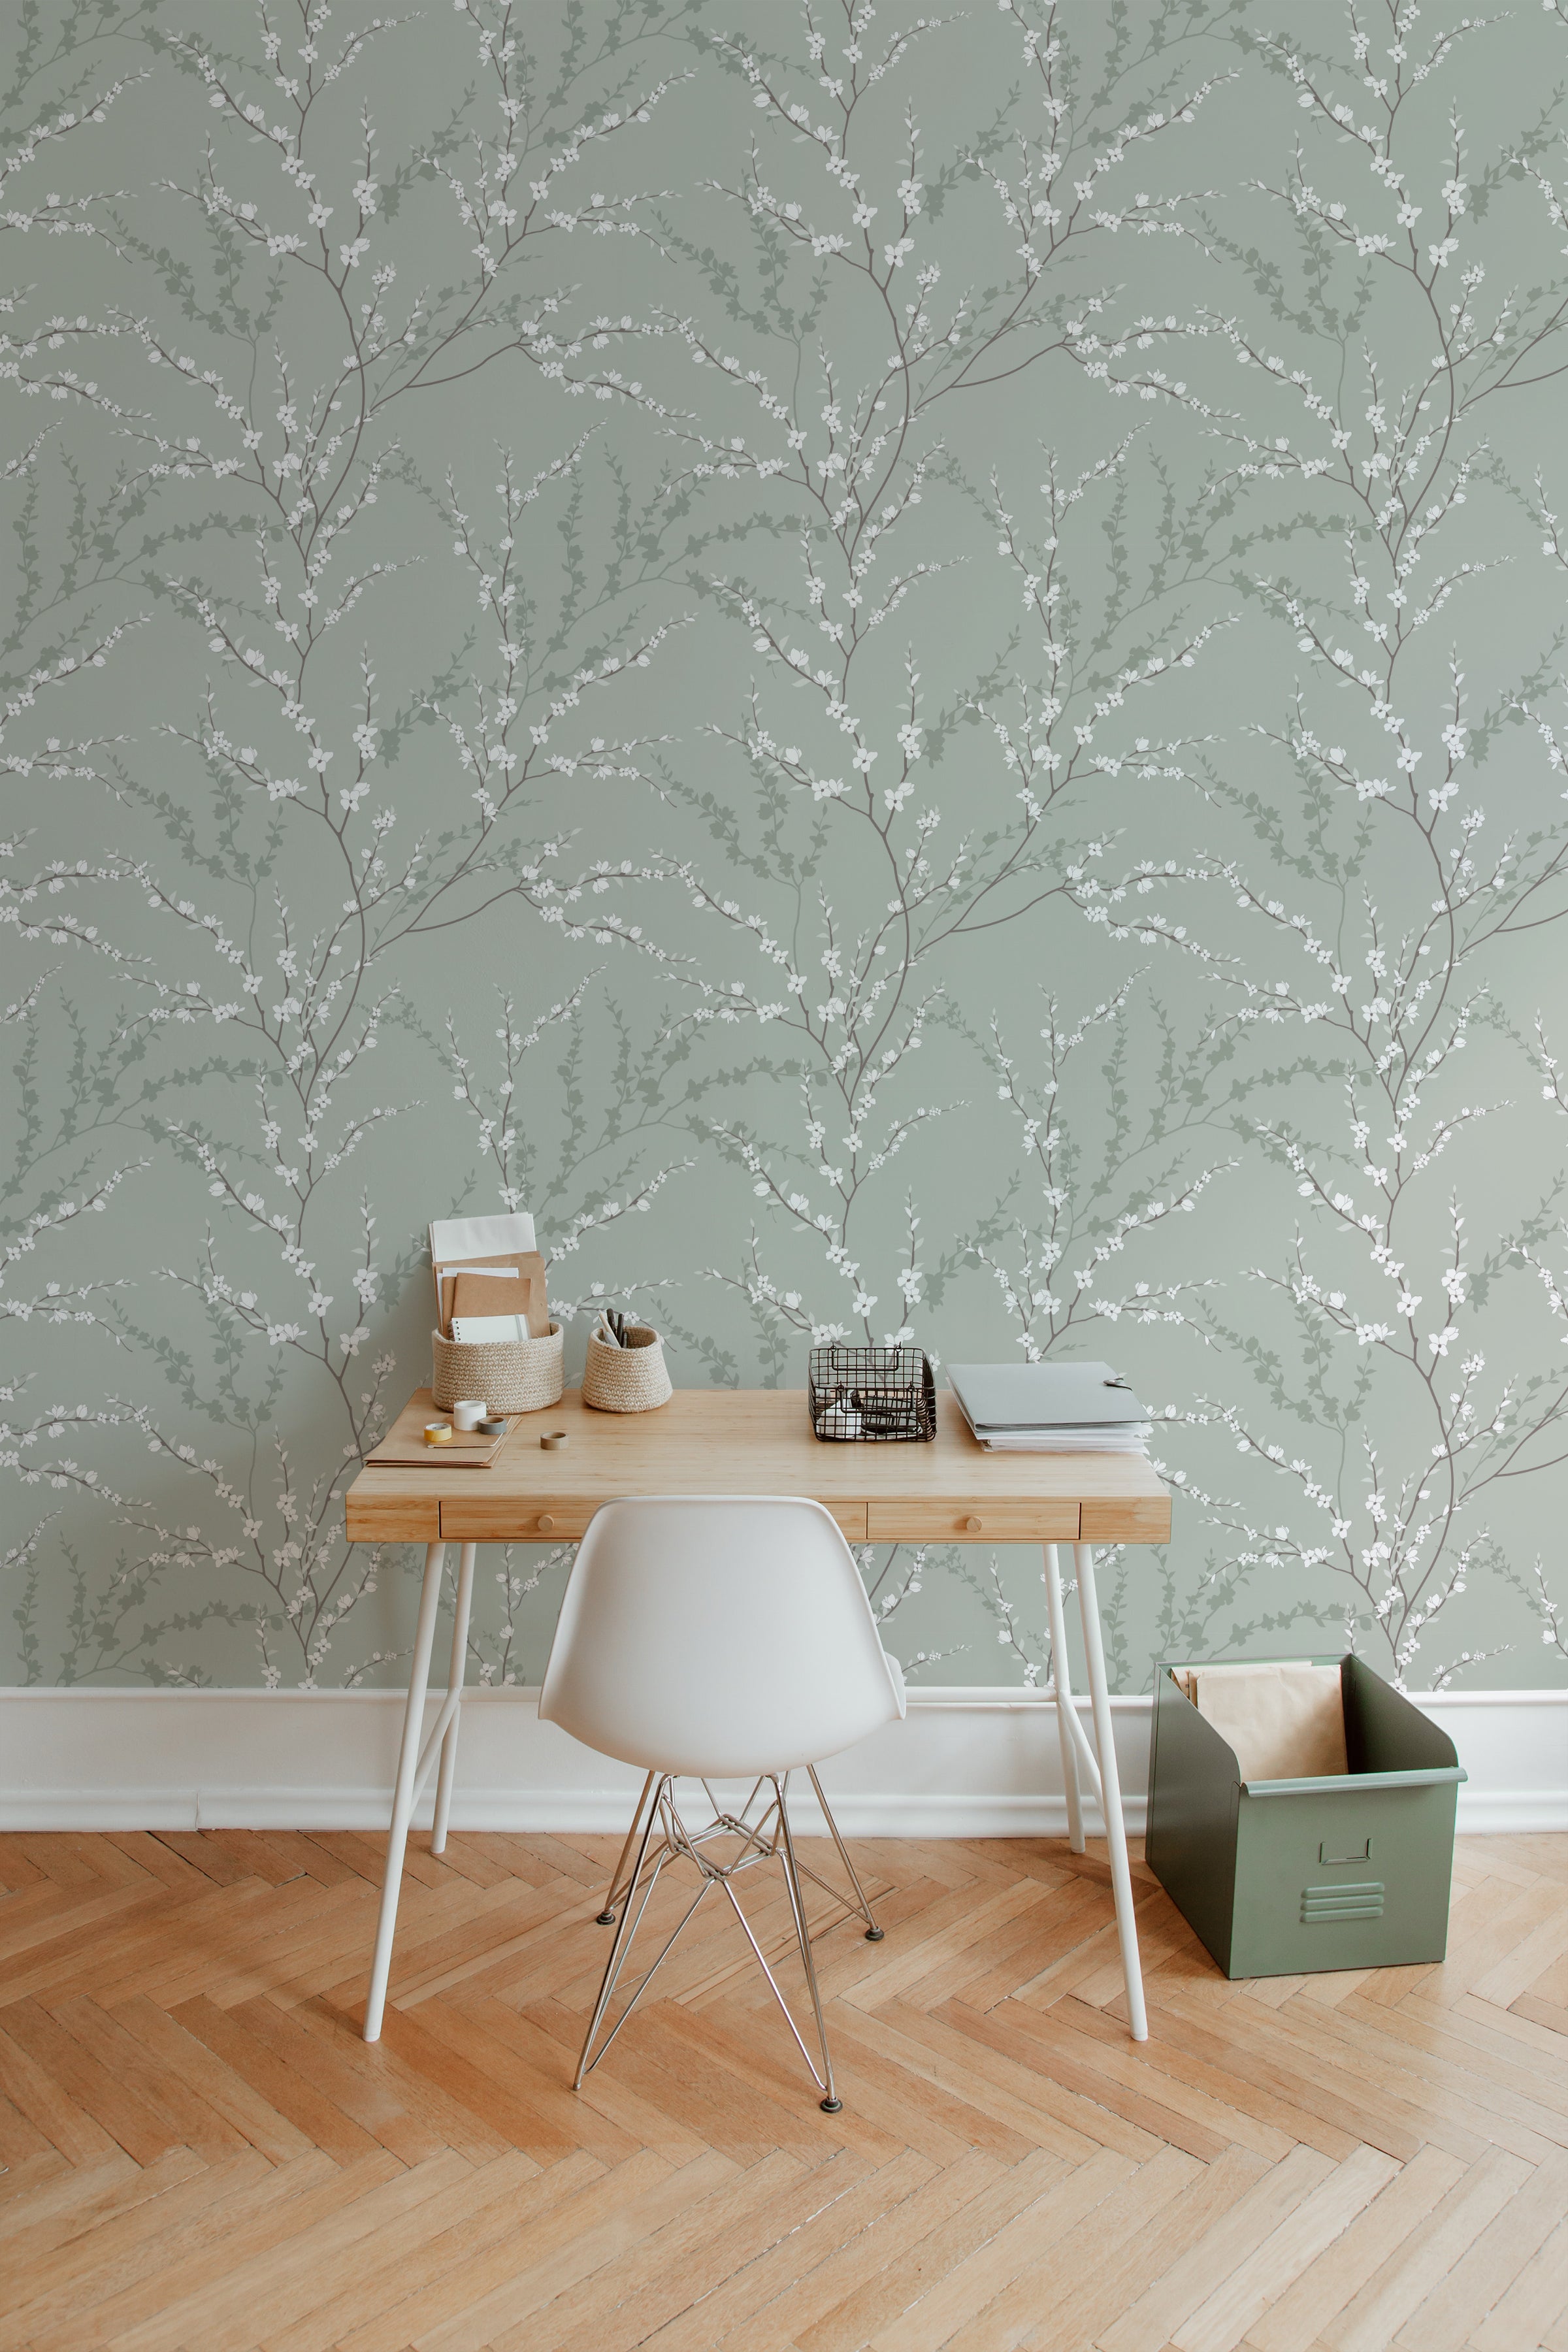 A minimalist workspace is elevated by the Enchanted Blossoms Wallpaper, which features elegant white blossoms on slender branches against a soft green background, offering a serene and sophisticated ambiance suitable for focus and creativity.